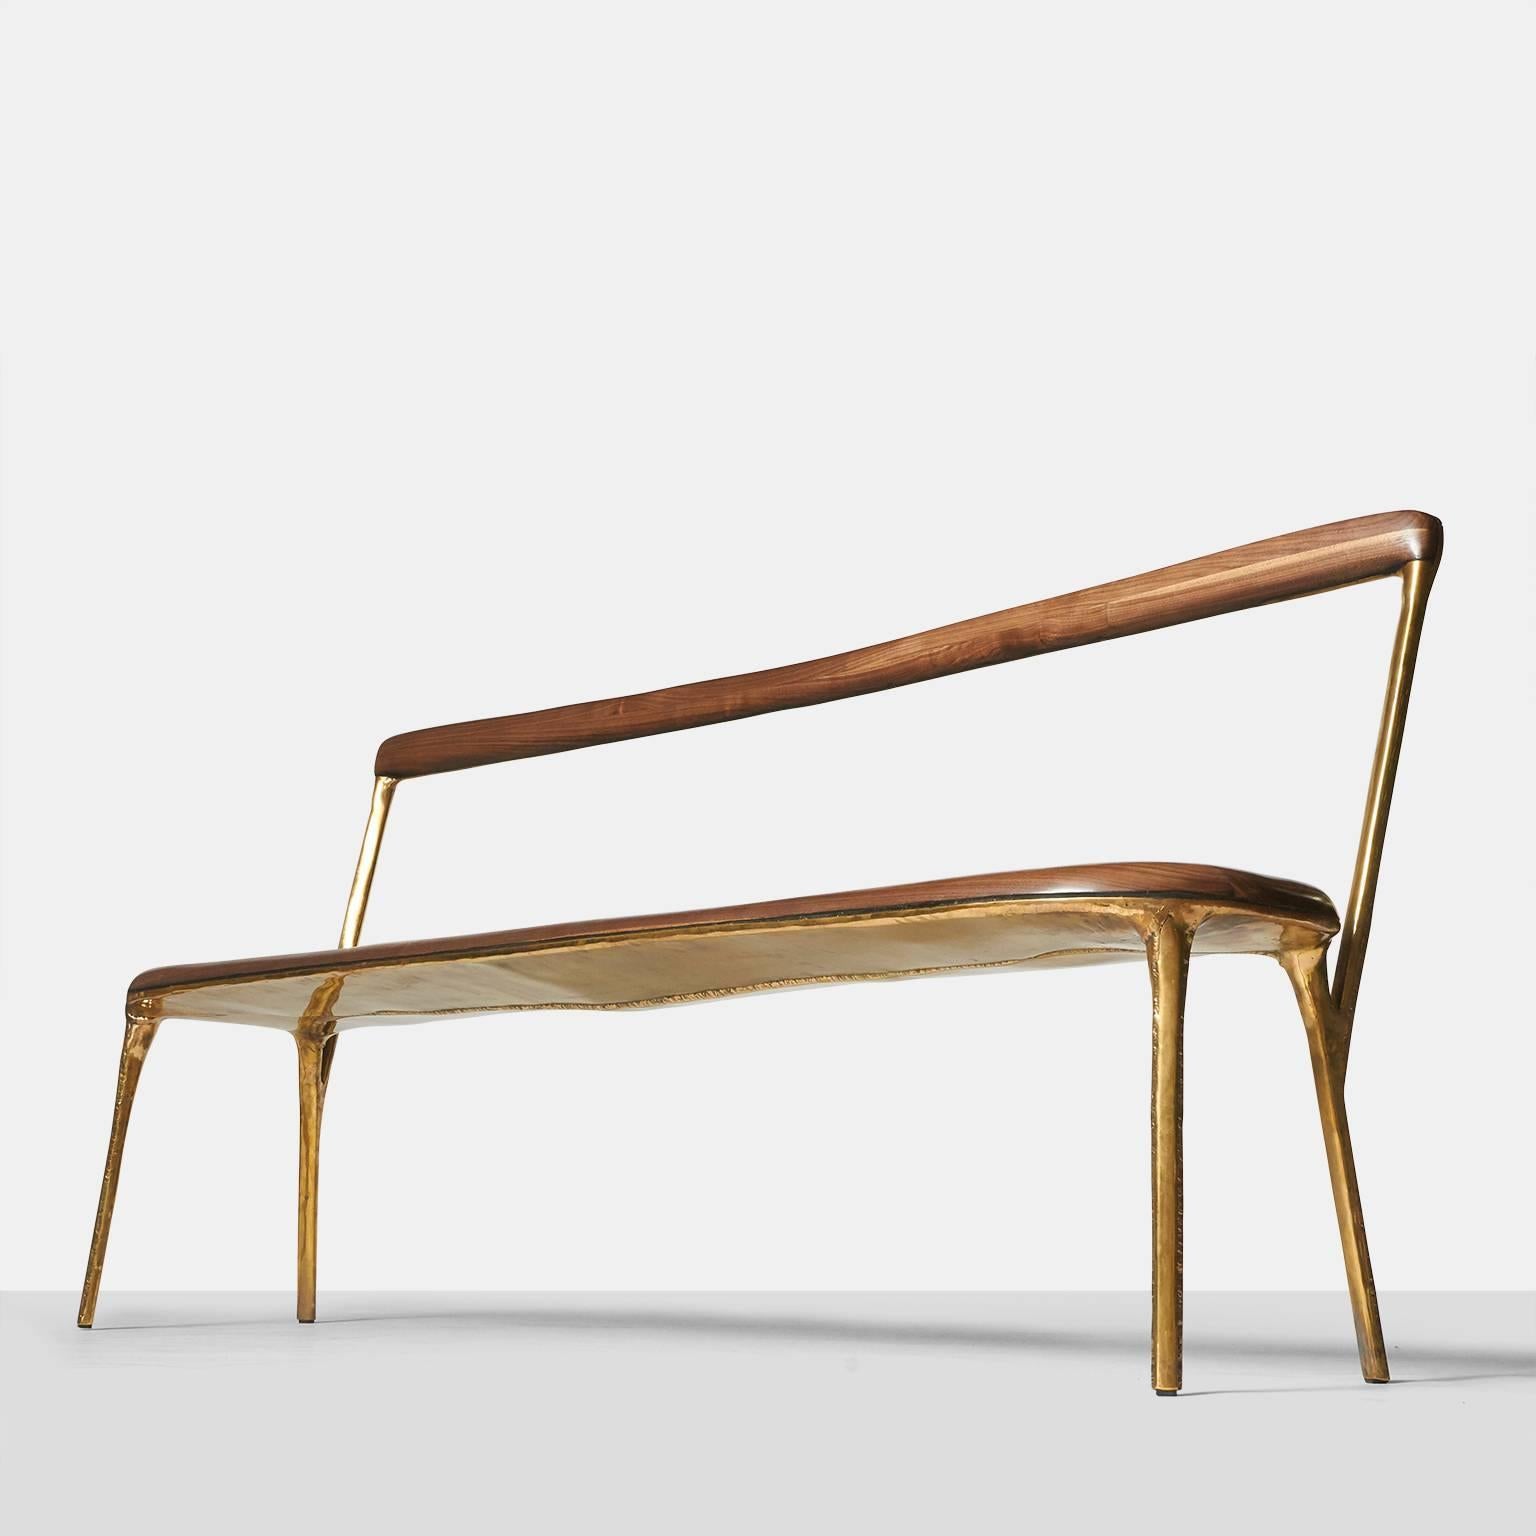 A bench in hand-worked bras with walnut seat and backrest. Incredible detail on all areas including the underside.
Each piece is completely handmade by Valentin Loellmann and all are signed and numbered. Valentin Loellmann was an award winner at PAD